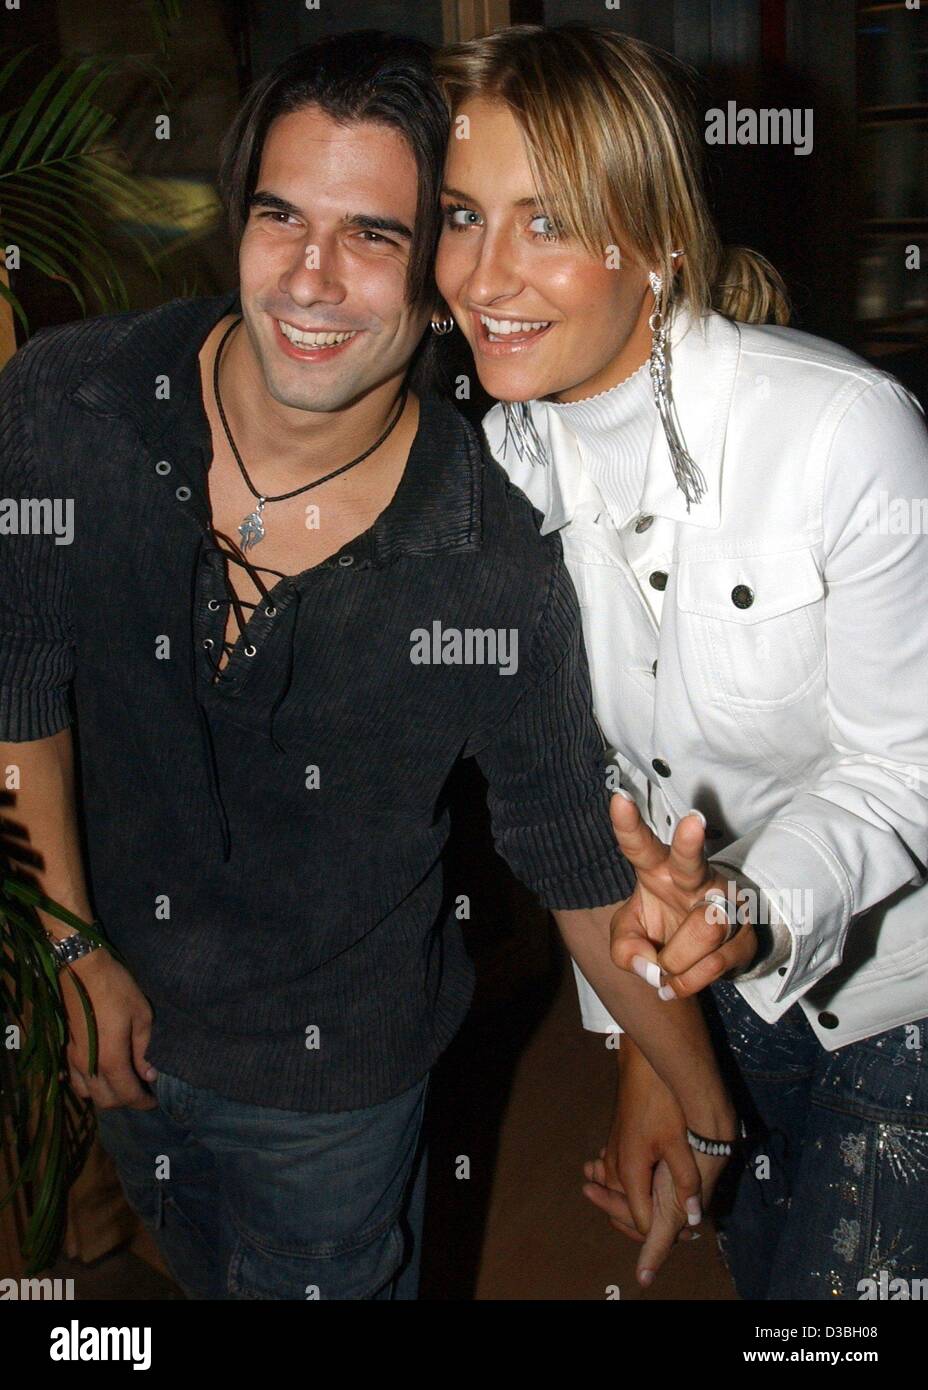 (dpa) - Popstar Sarah Connor and her boyfriend Marc Terenzi of the US boygroup Natural party during the T-Online Medientreff (media meeting) with numerous celebrities in Berlin, 13 June 2003. Sarah Connor celebrated her 23rd birthday after midnight. Stock Photo